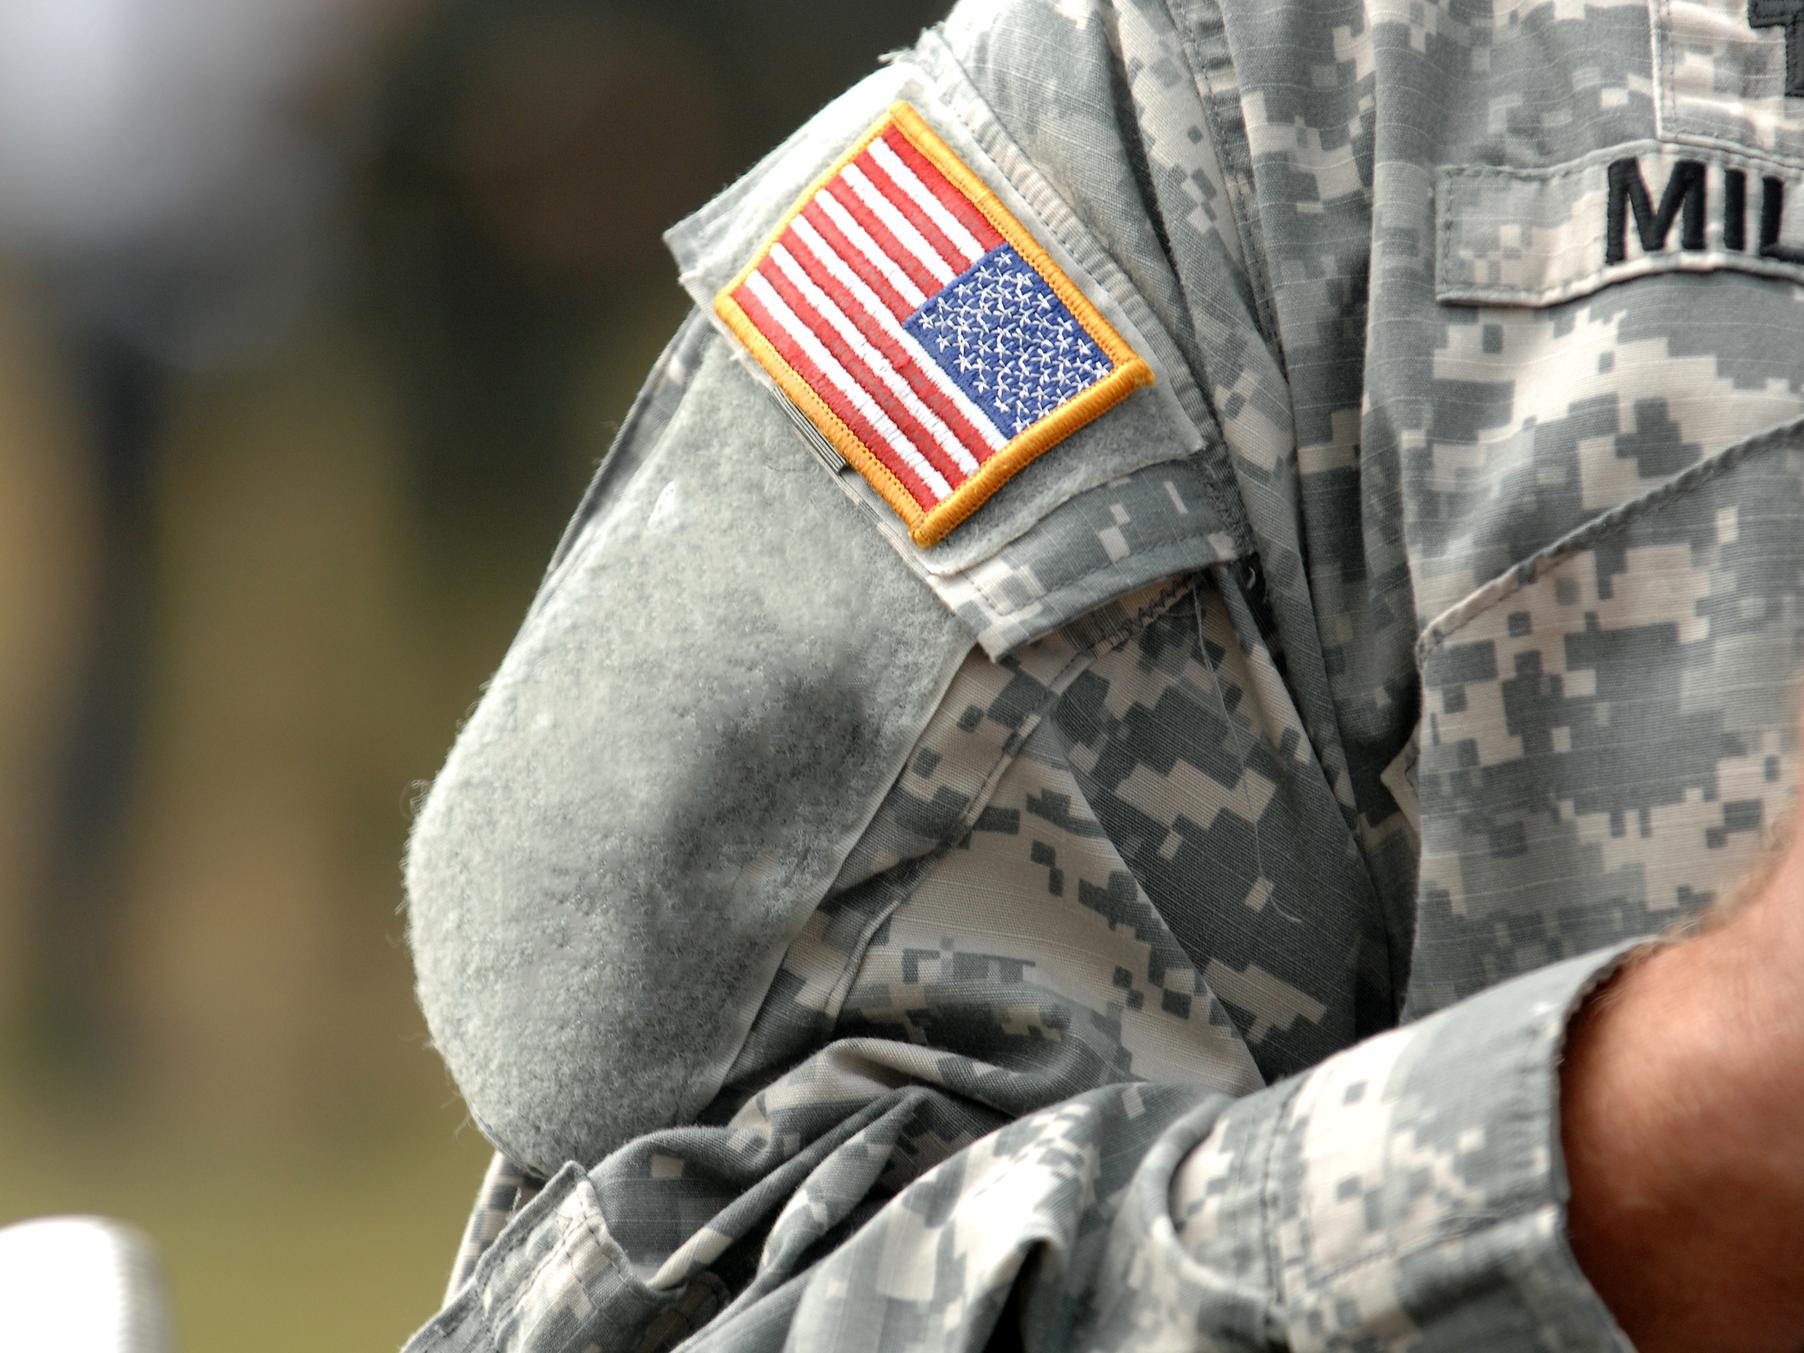 A close up of a US flag patch on a soldier's sleeve